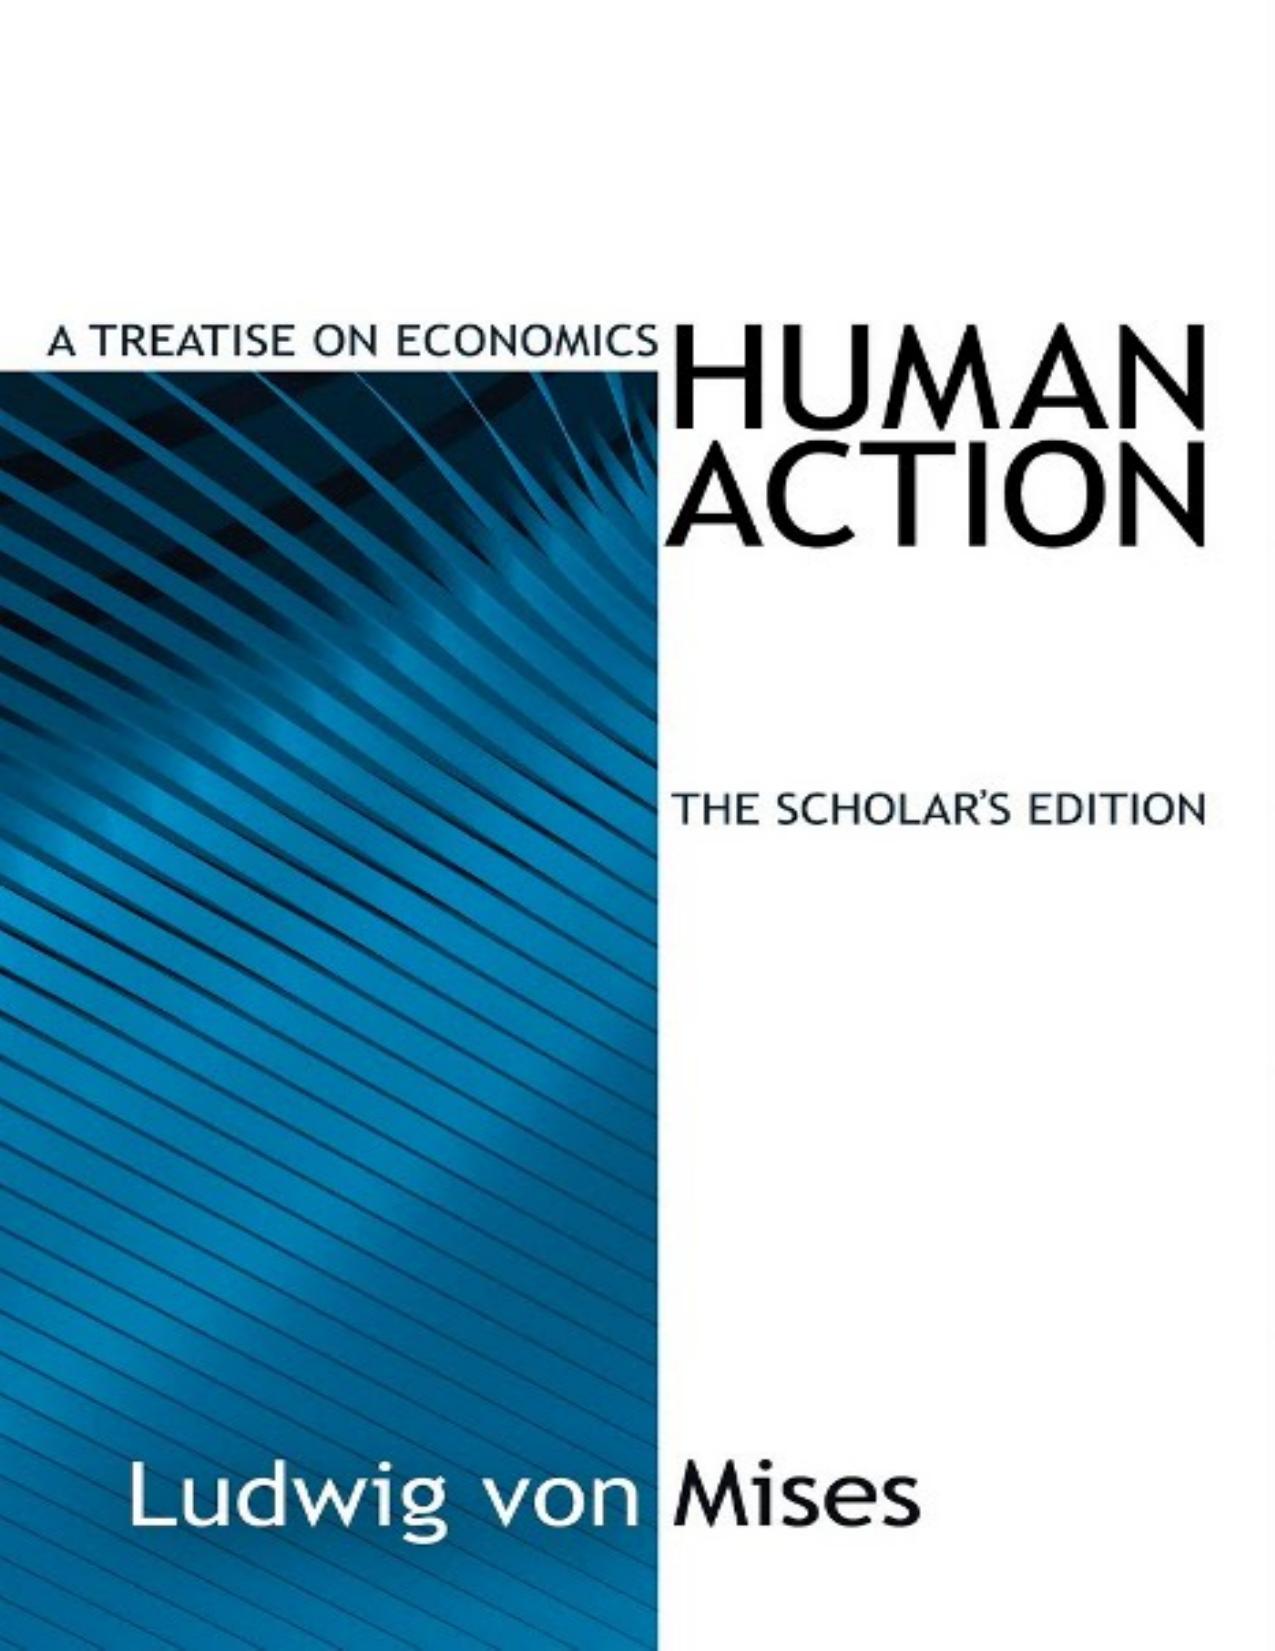 Human Action: A Treatise on Economics  by Ludwig VonMises